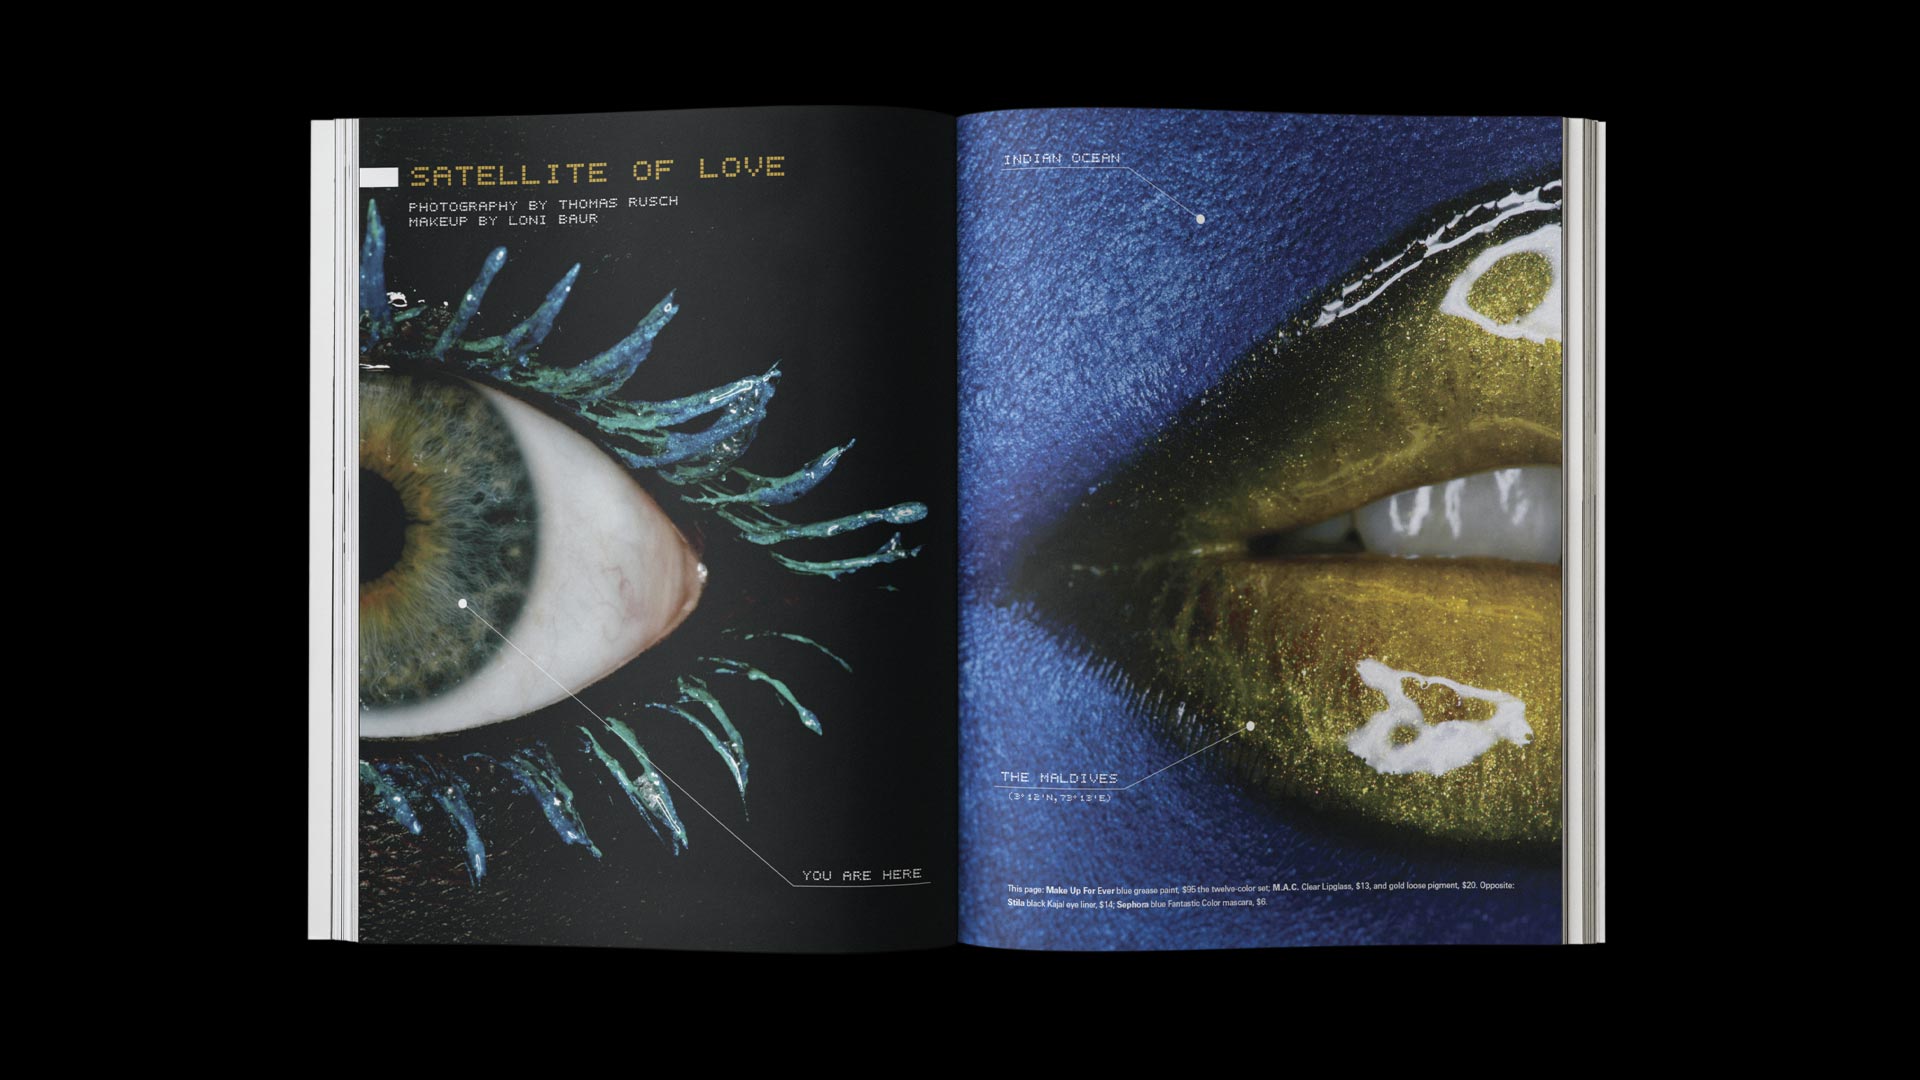 Satellite of Love beauty, finding beauty on Google Earth editorial close-up of model's eye with teal eyeshadow and island aerial view published in City Magazine, photographed by Thomas Rusch with makeup by Loni Baur and creative direction by Fabrice Frere of PlanetFab.